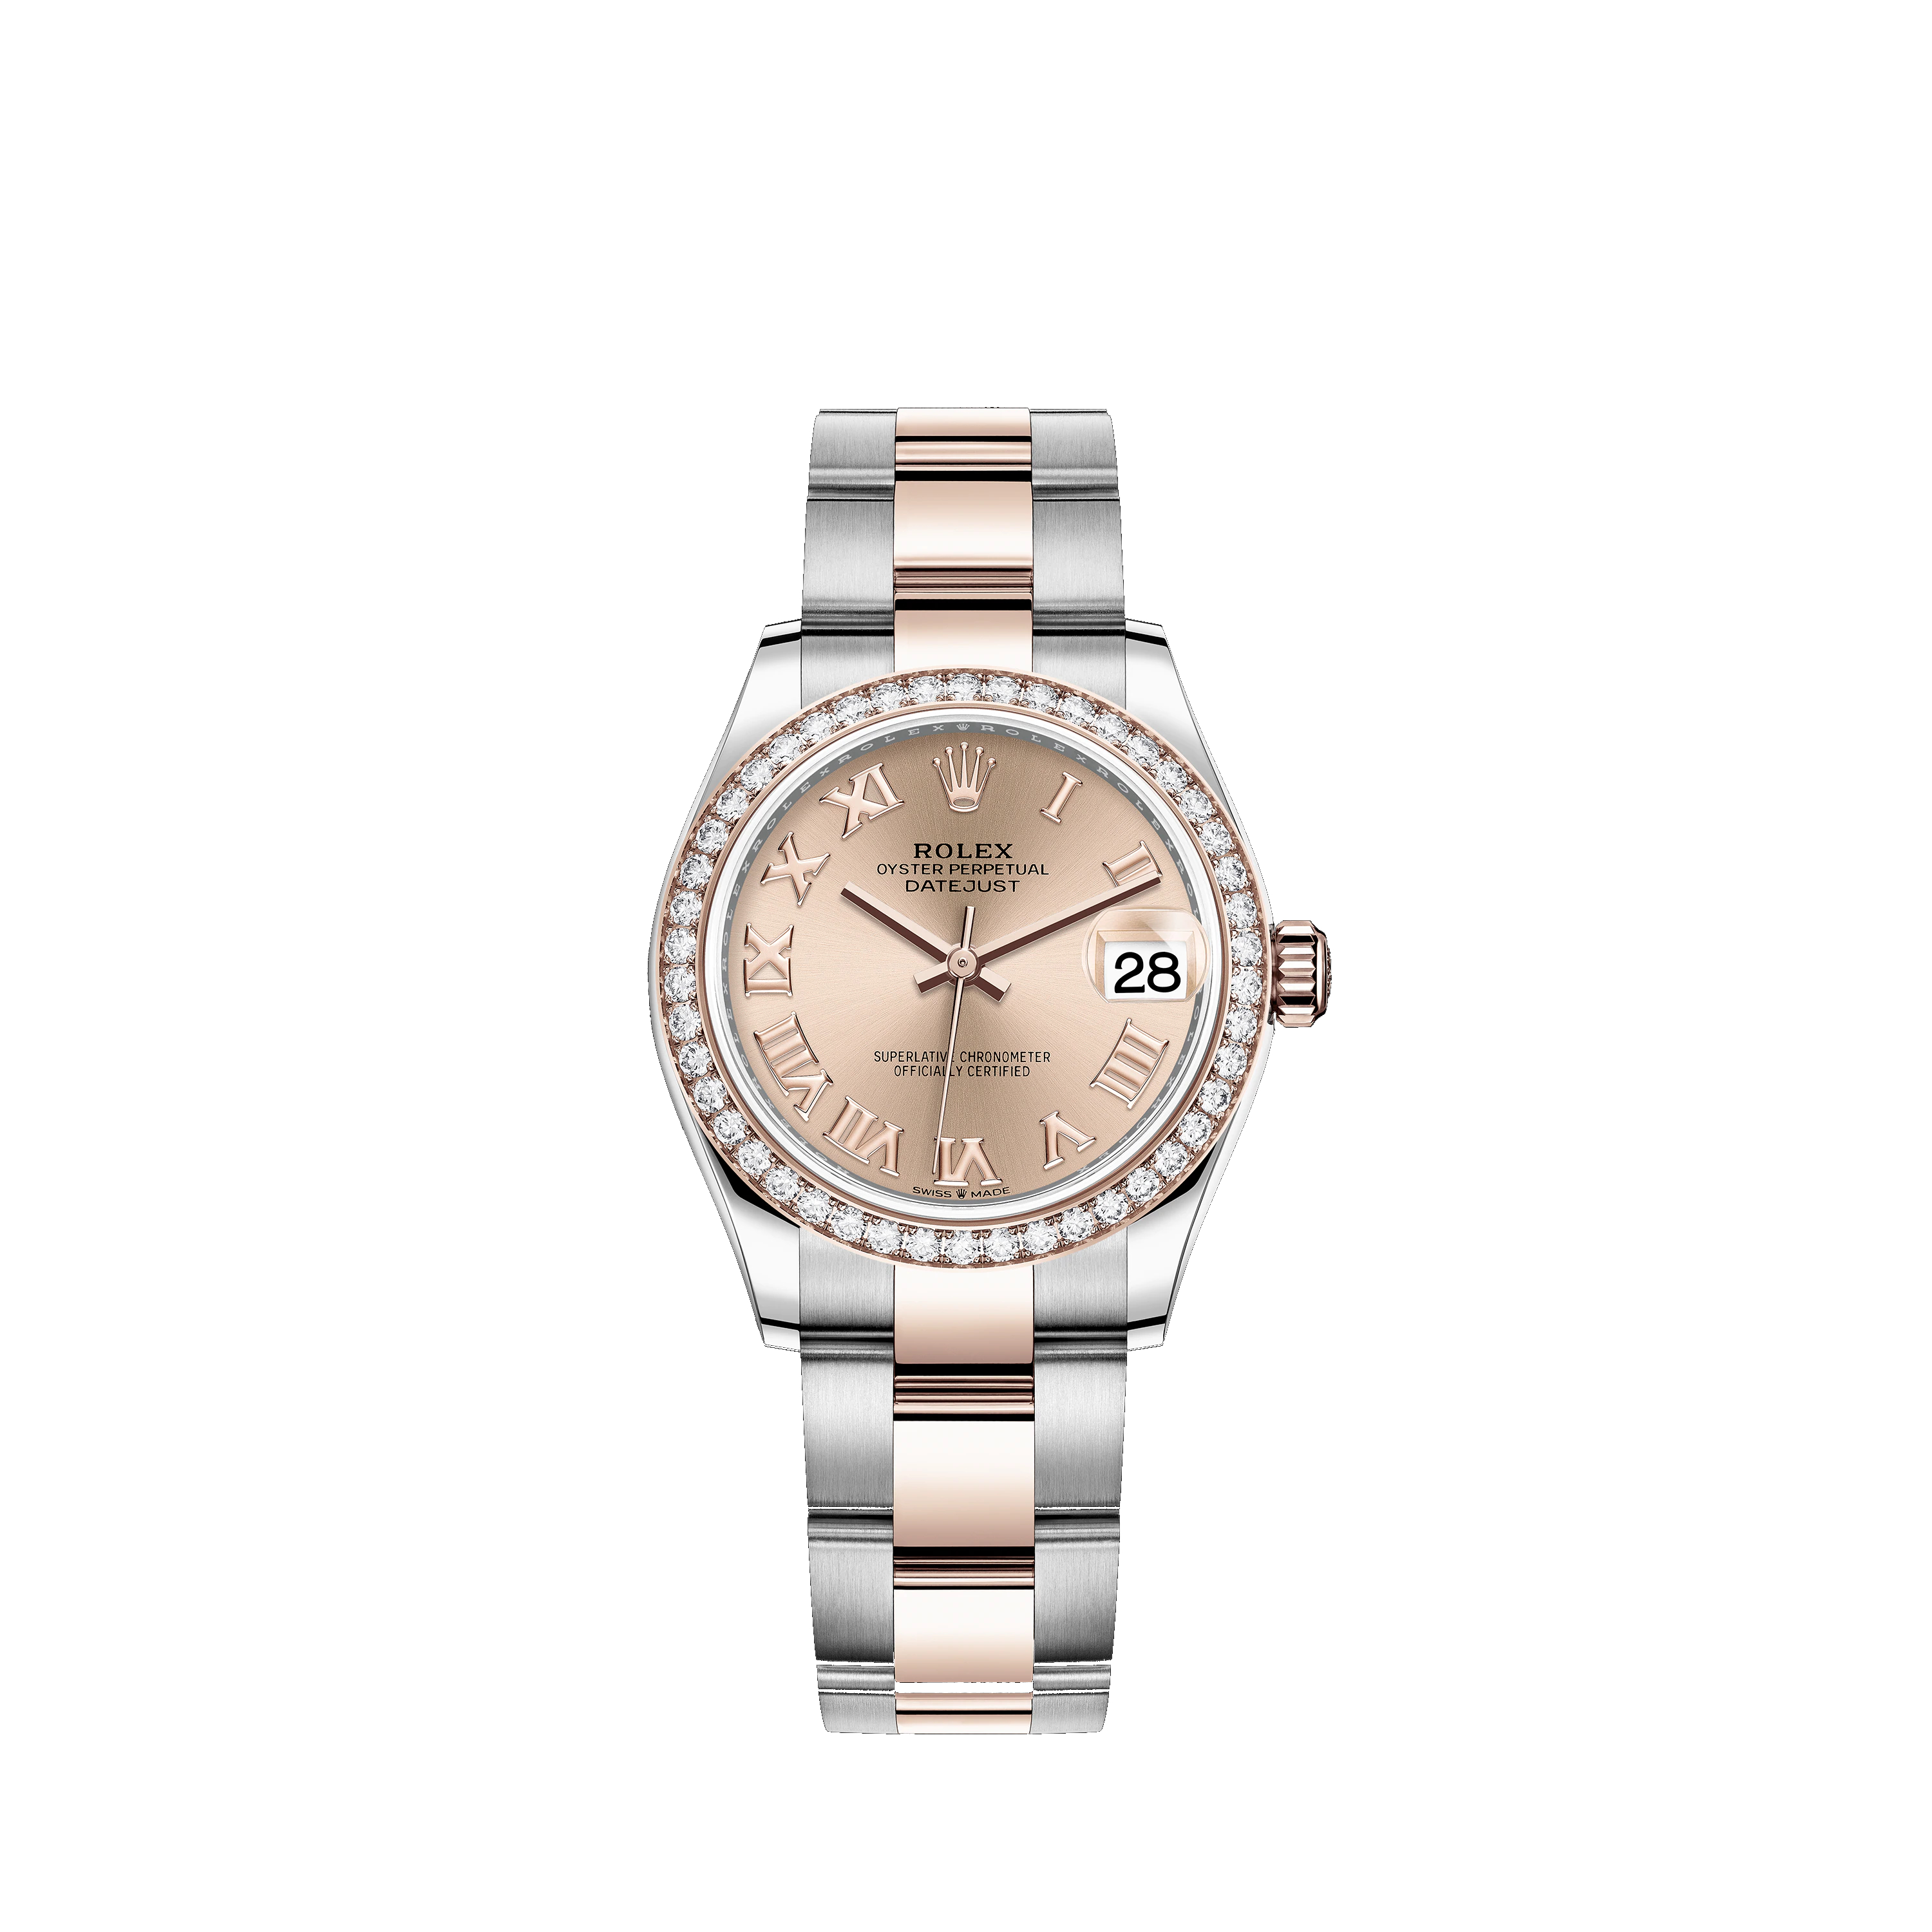 Datejust 31 278381RBR Rose Gold, Stainless Steel & Diamonds Watch (Rosé Colour)